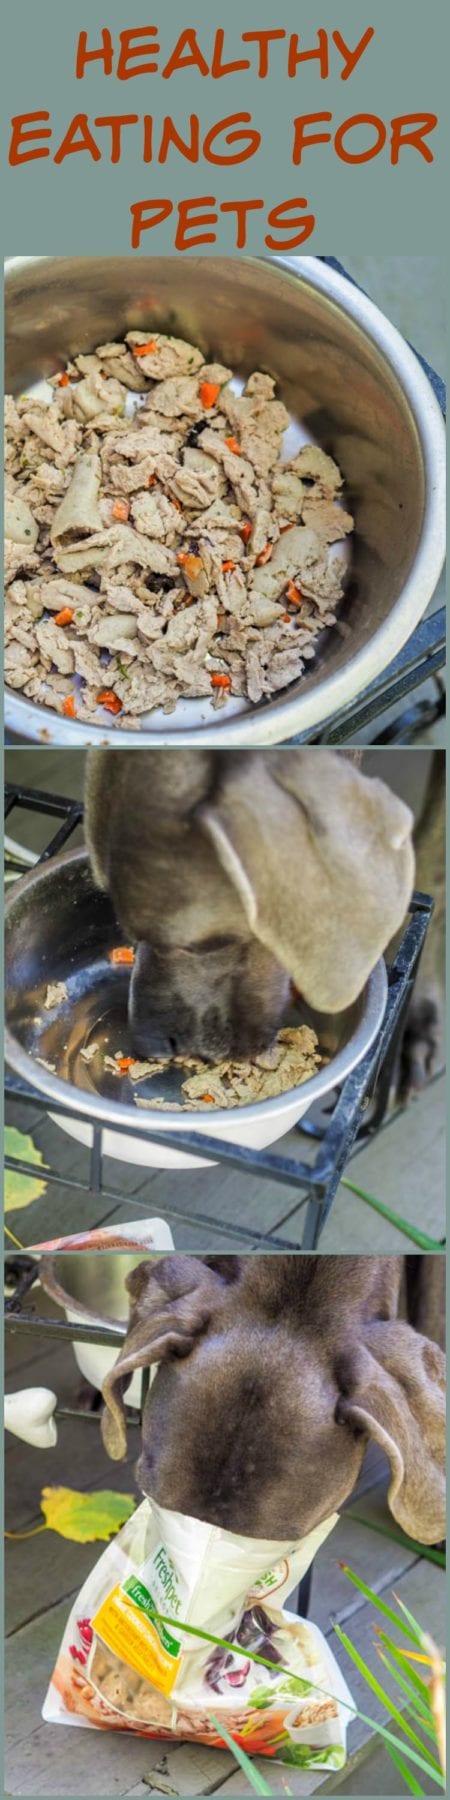 Healthier eating isn't just for us humans, it's for pets too! As a member of my family it's just as important for me to make healthy eating choices for my pets too! #PickyEaterApproved #ad